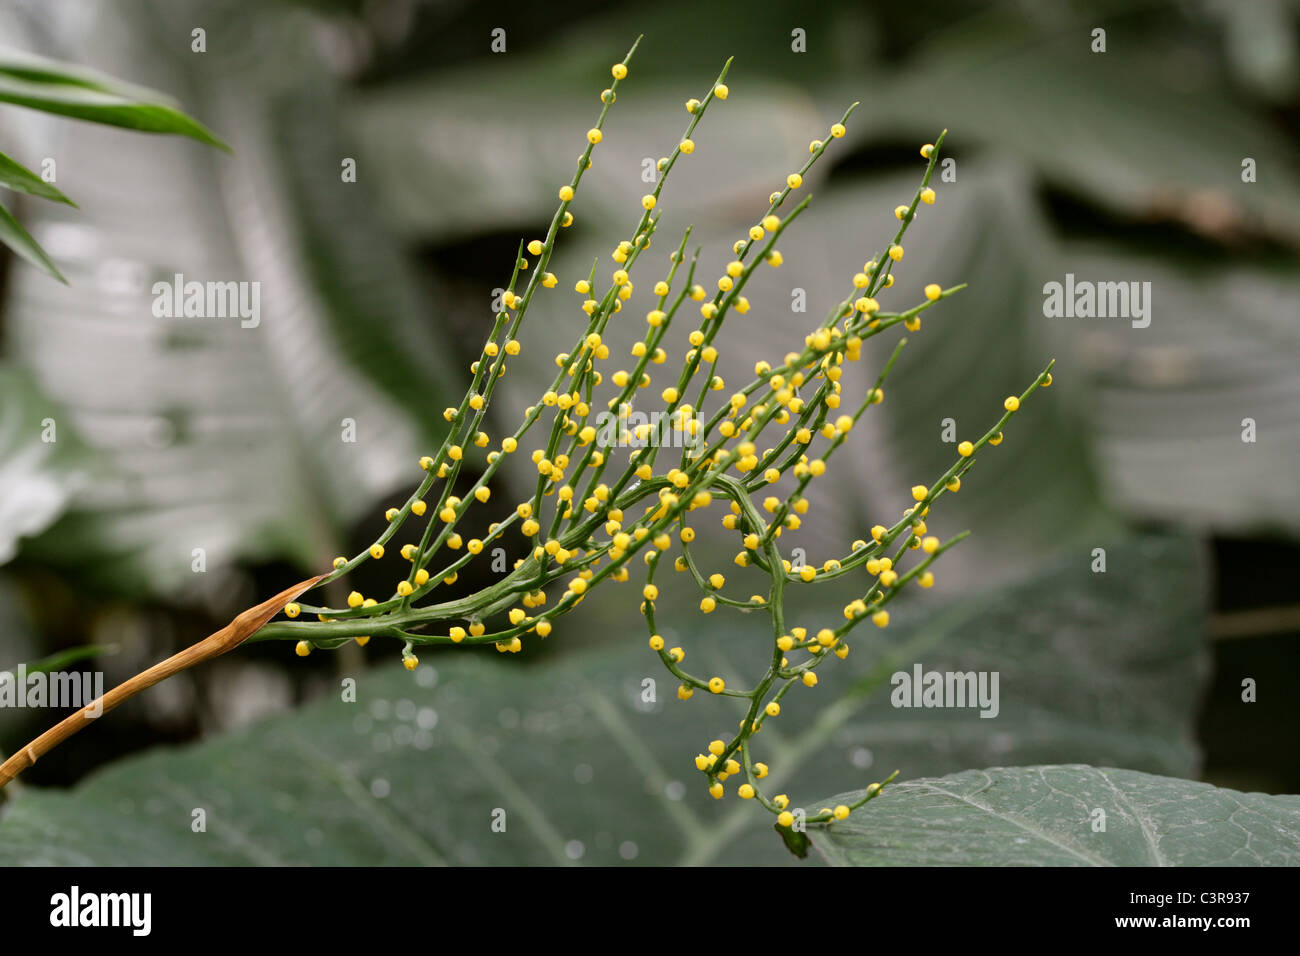 Palm with Small Yellow Spherical Berries. Stock Photo